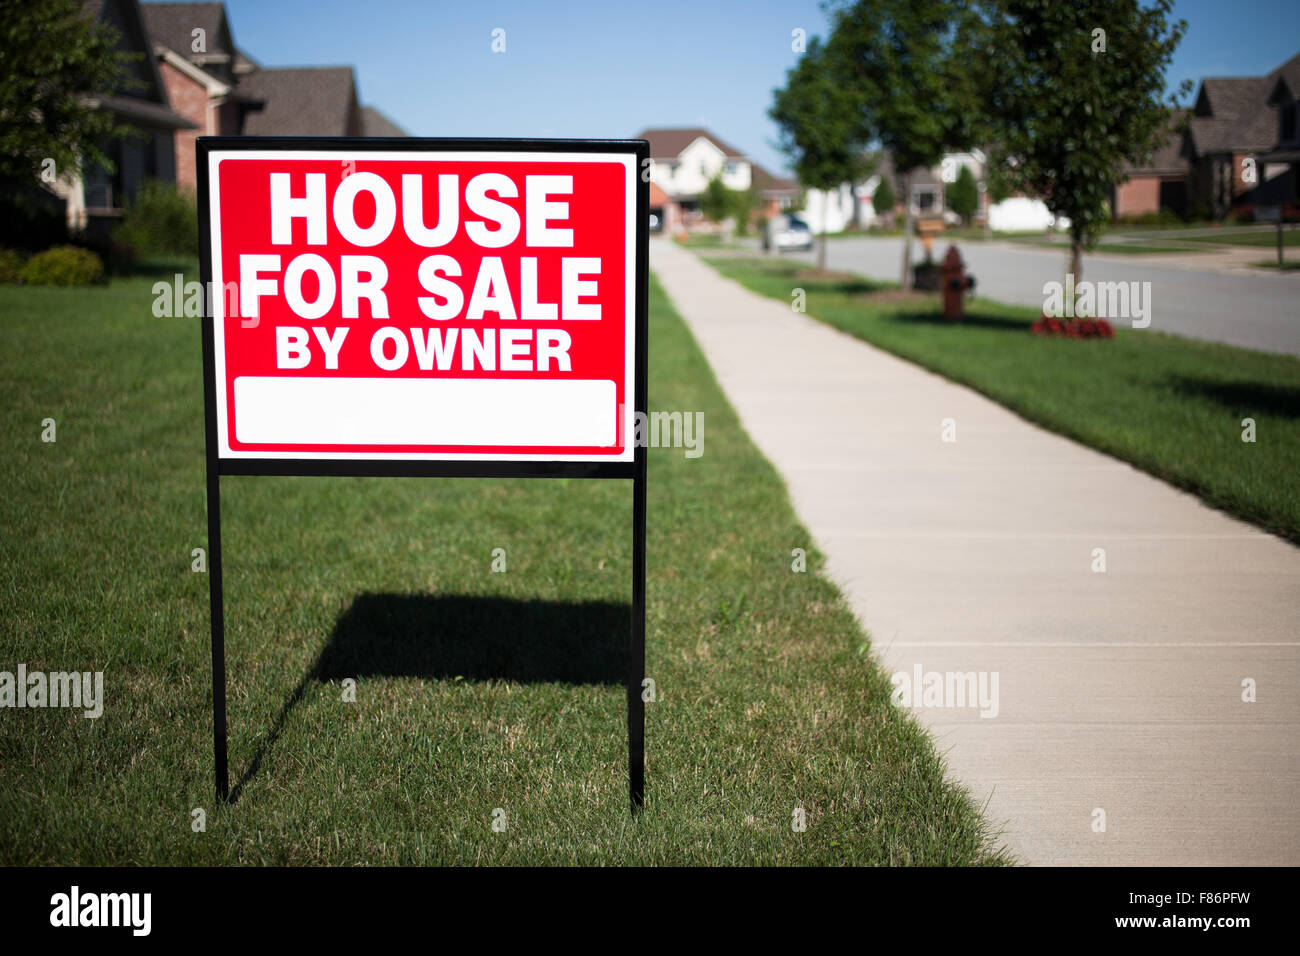 House For Sale By Owner Sign in a front yard of a home Stock Photo